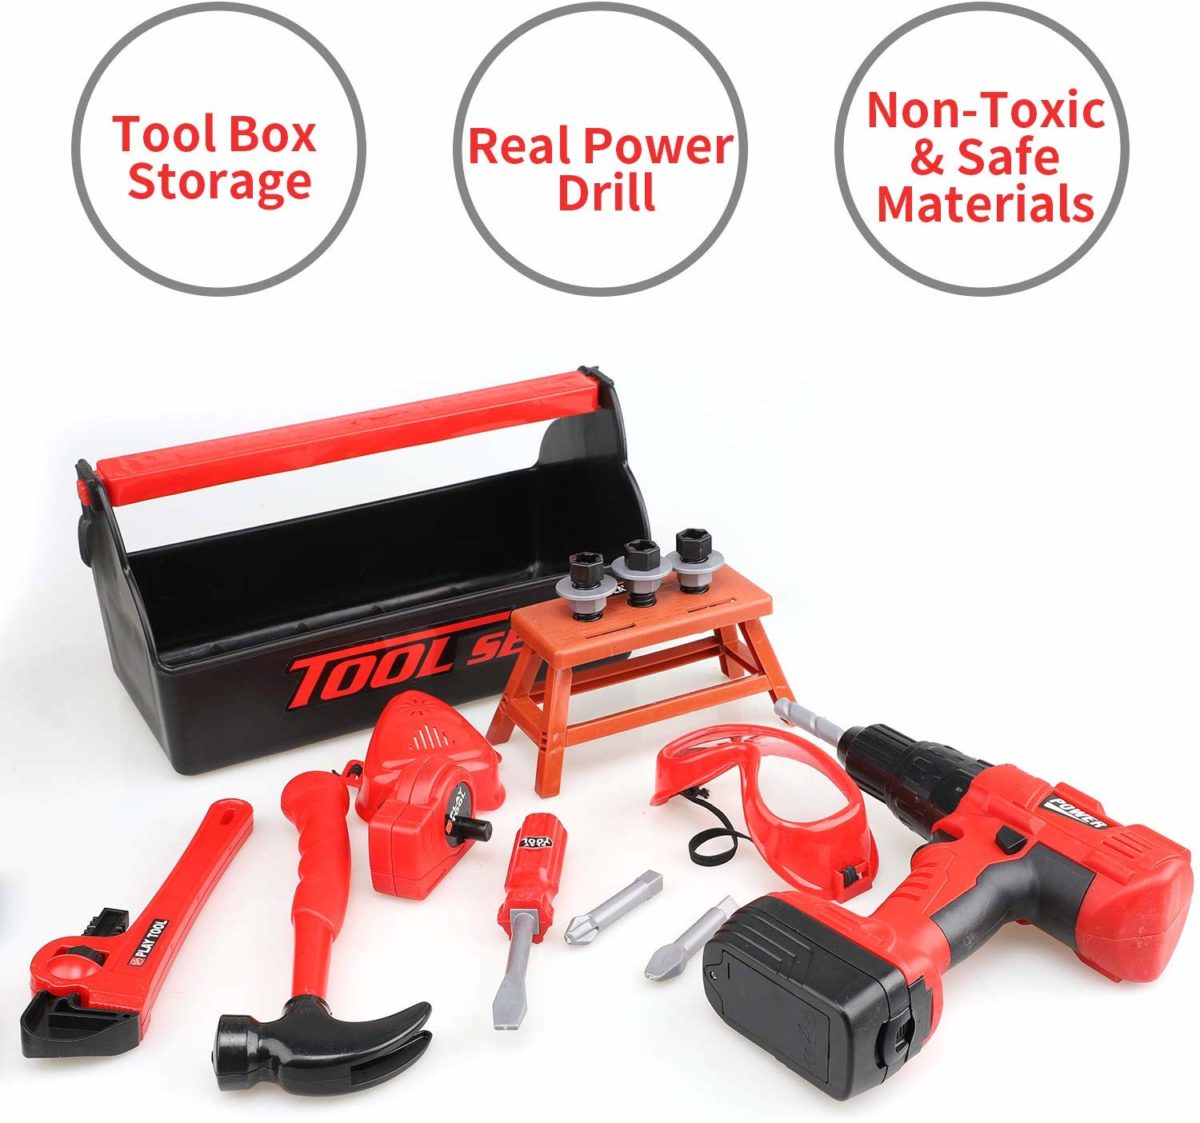 STEAM Life Kids Tool Set with Power Toy Drill - Top Toys and Gifts for Seven Year Old Boys 2